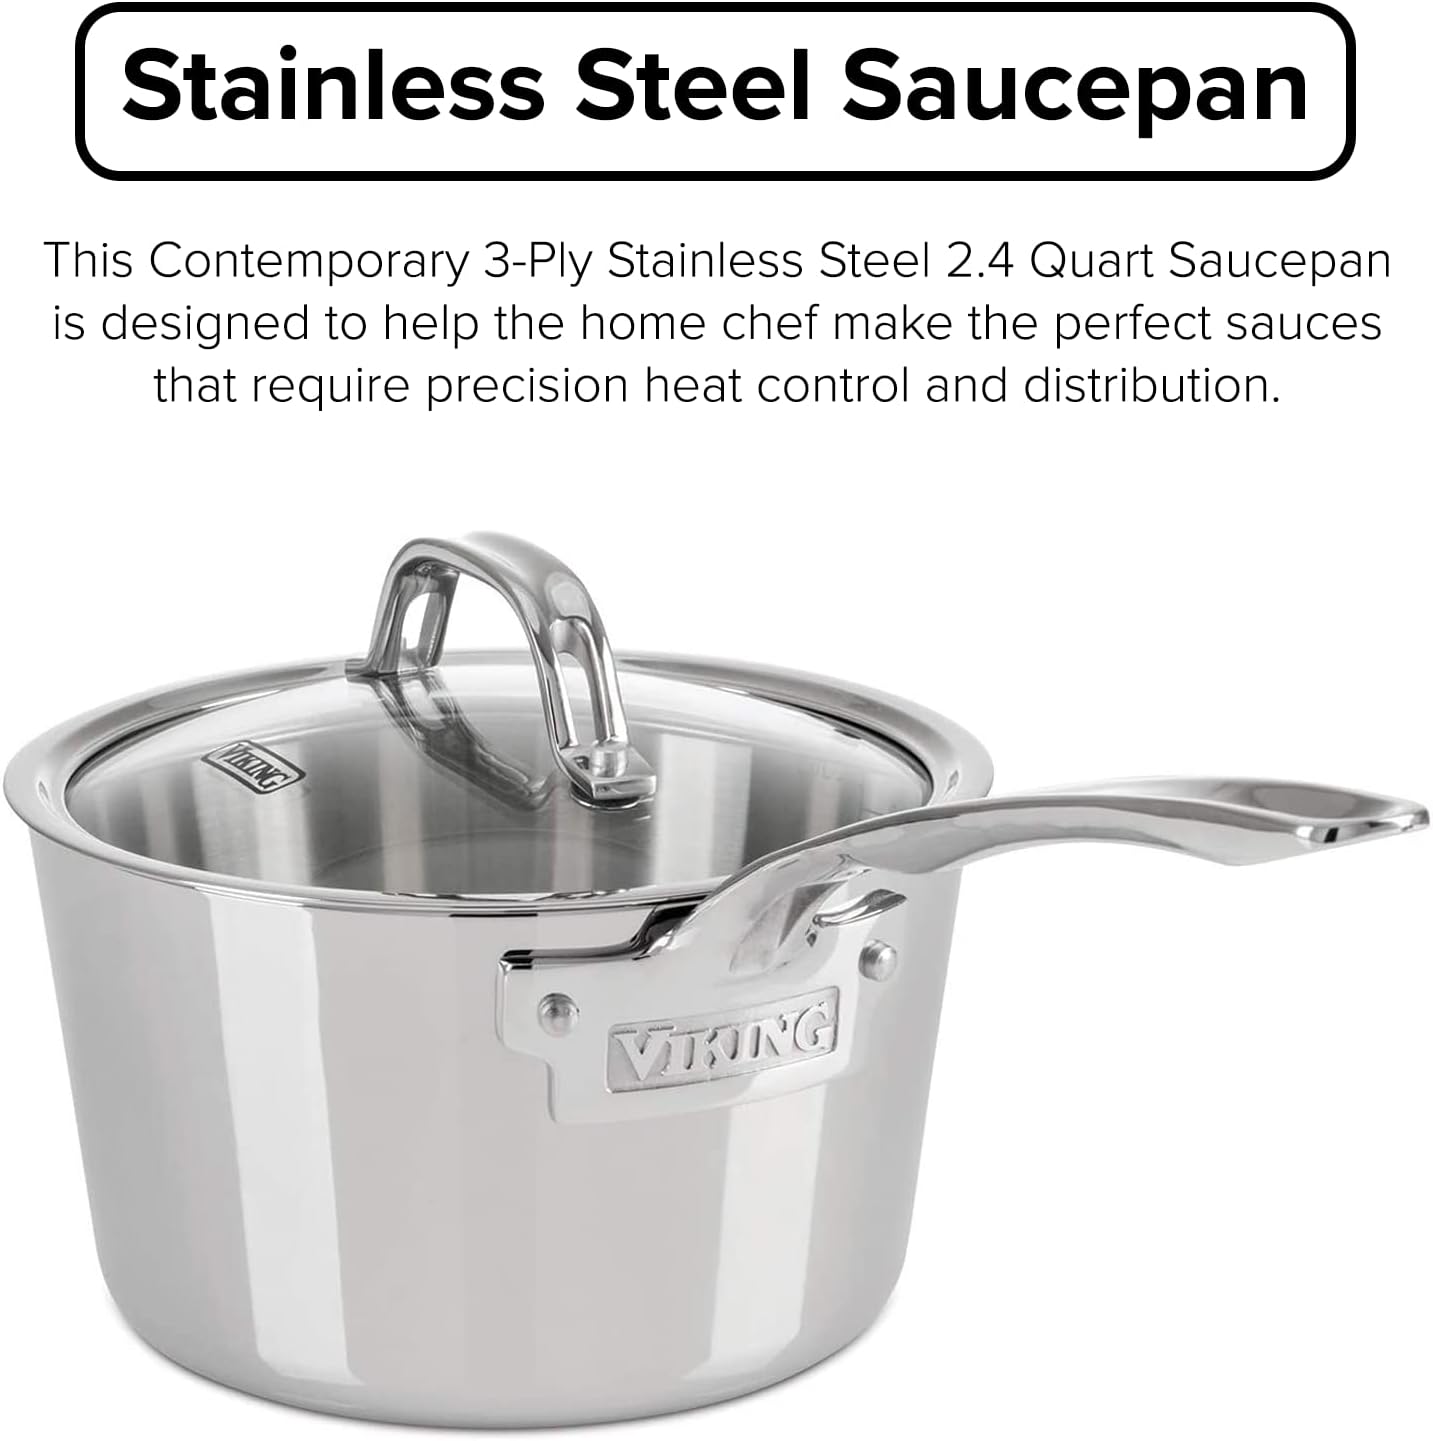 https://bigbigmart.com/wp-content/uploads/2023/08/Viking-Culinary-Contemporary-3-Ply-Stainless-Steel-Saucepan-2.4-Quart-Includes-Glass-Lid-Dishwasher-Oven-Safe-Works-on-All-Cooktops-including-Induction1.jpg